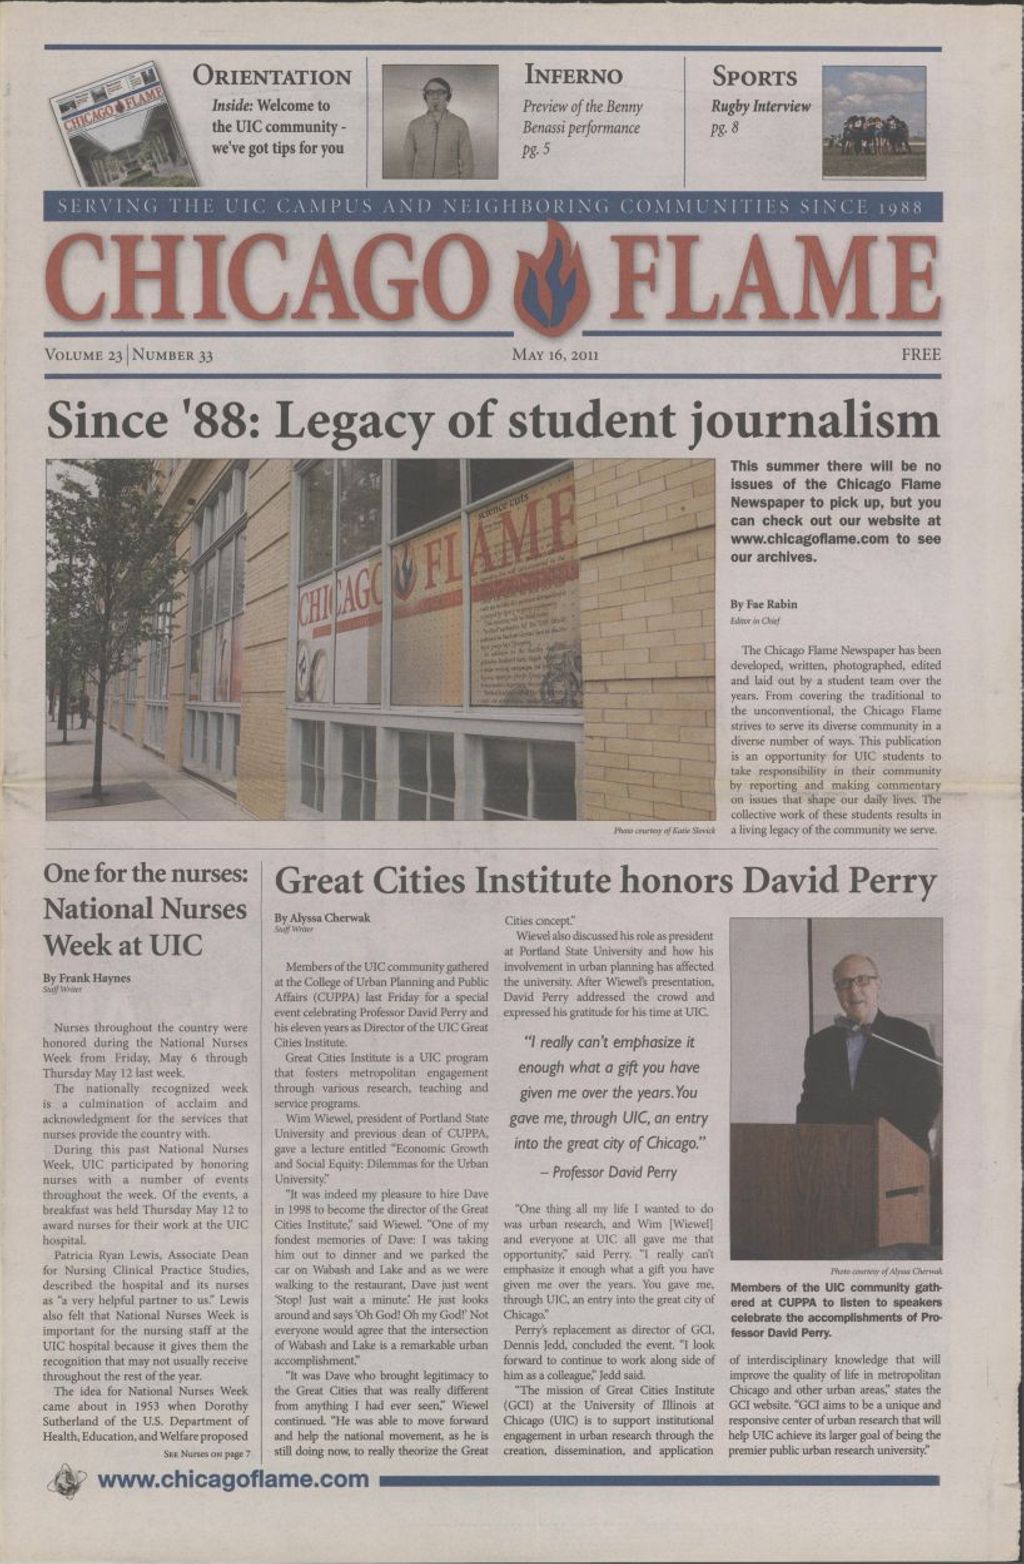 Miniature of Chicago Flame (May 16, 2011)